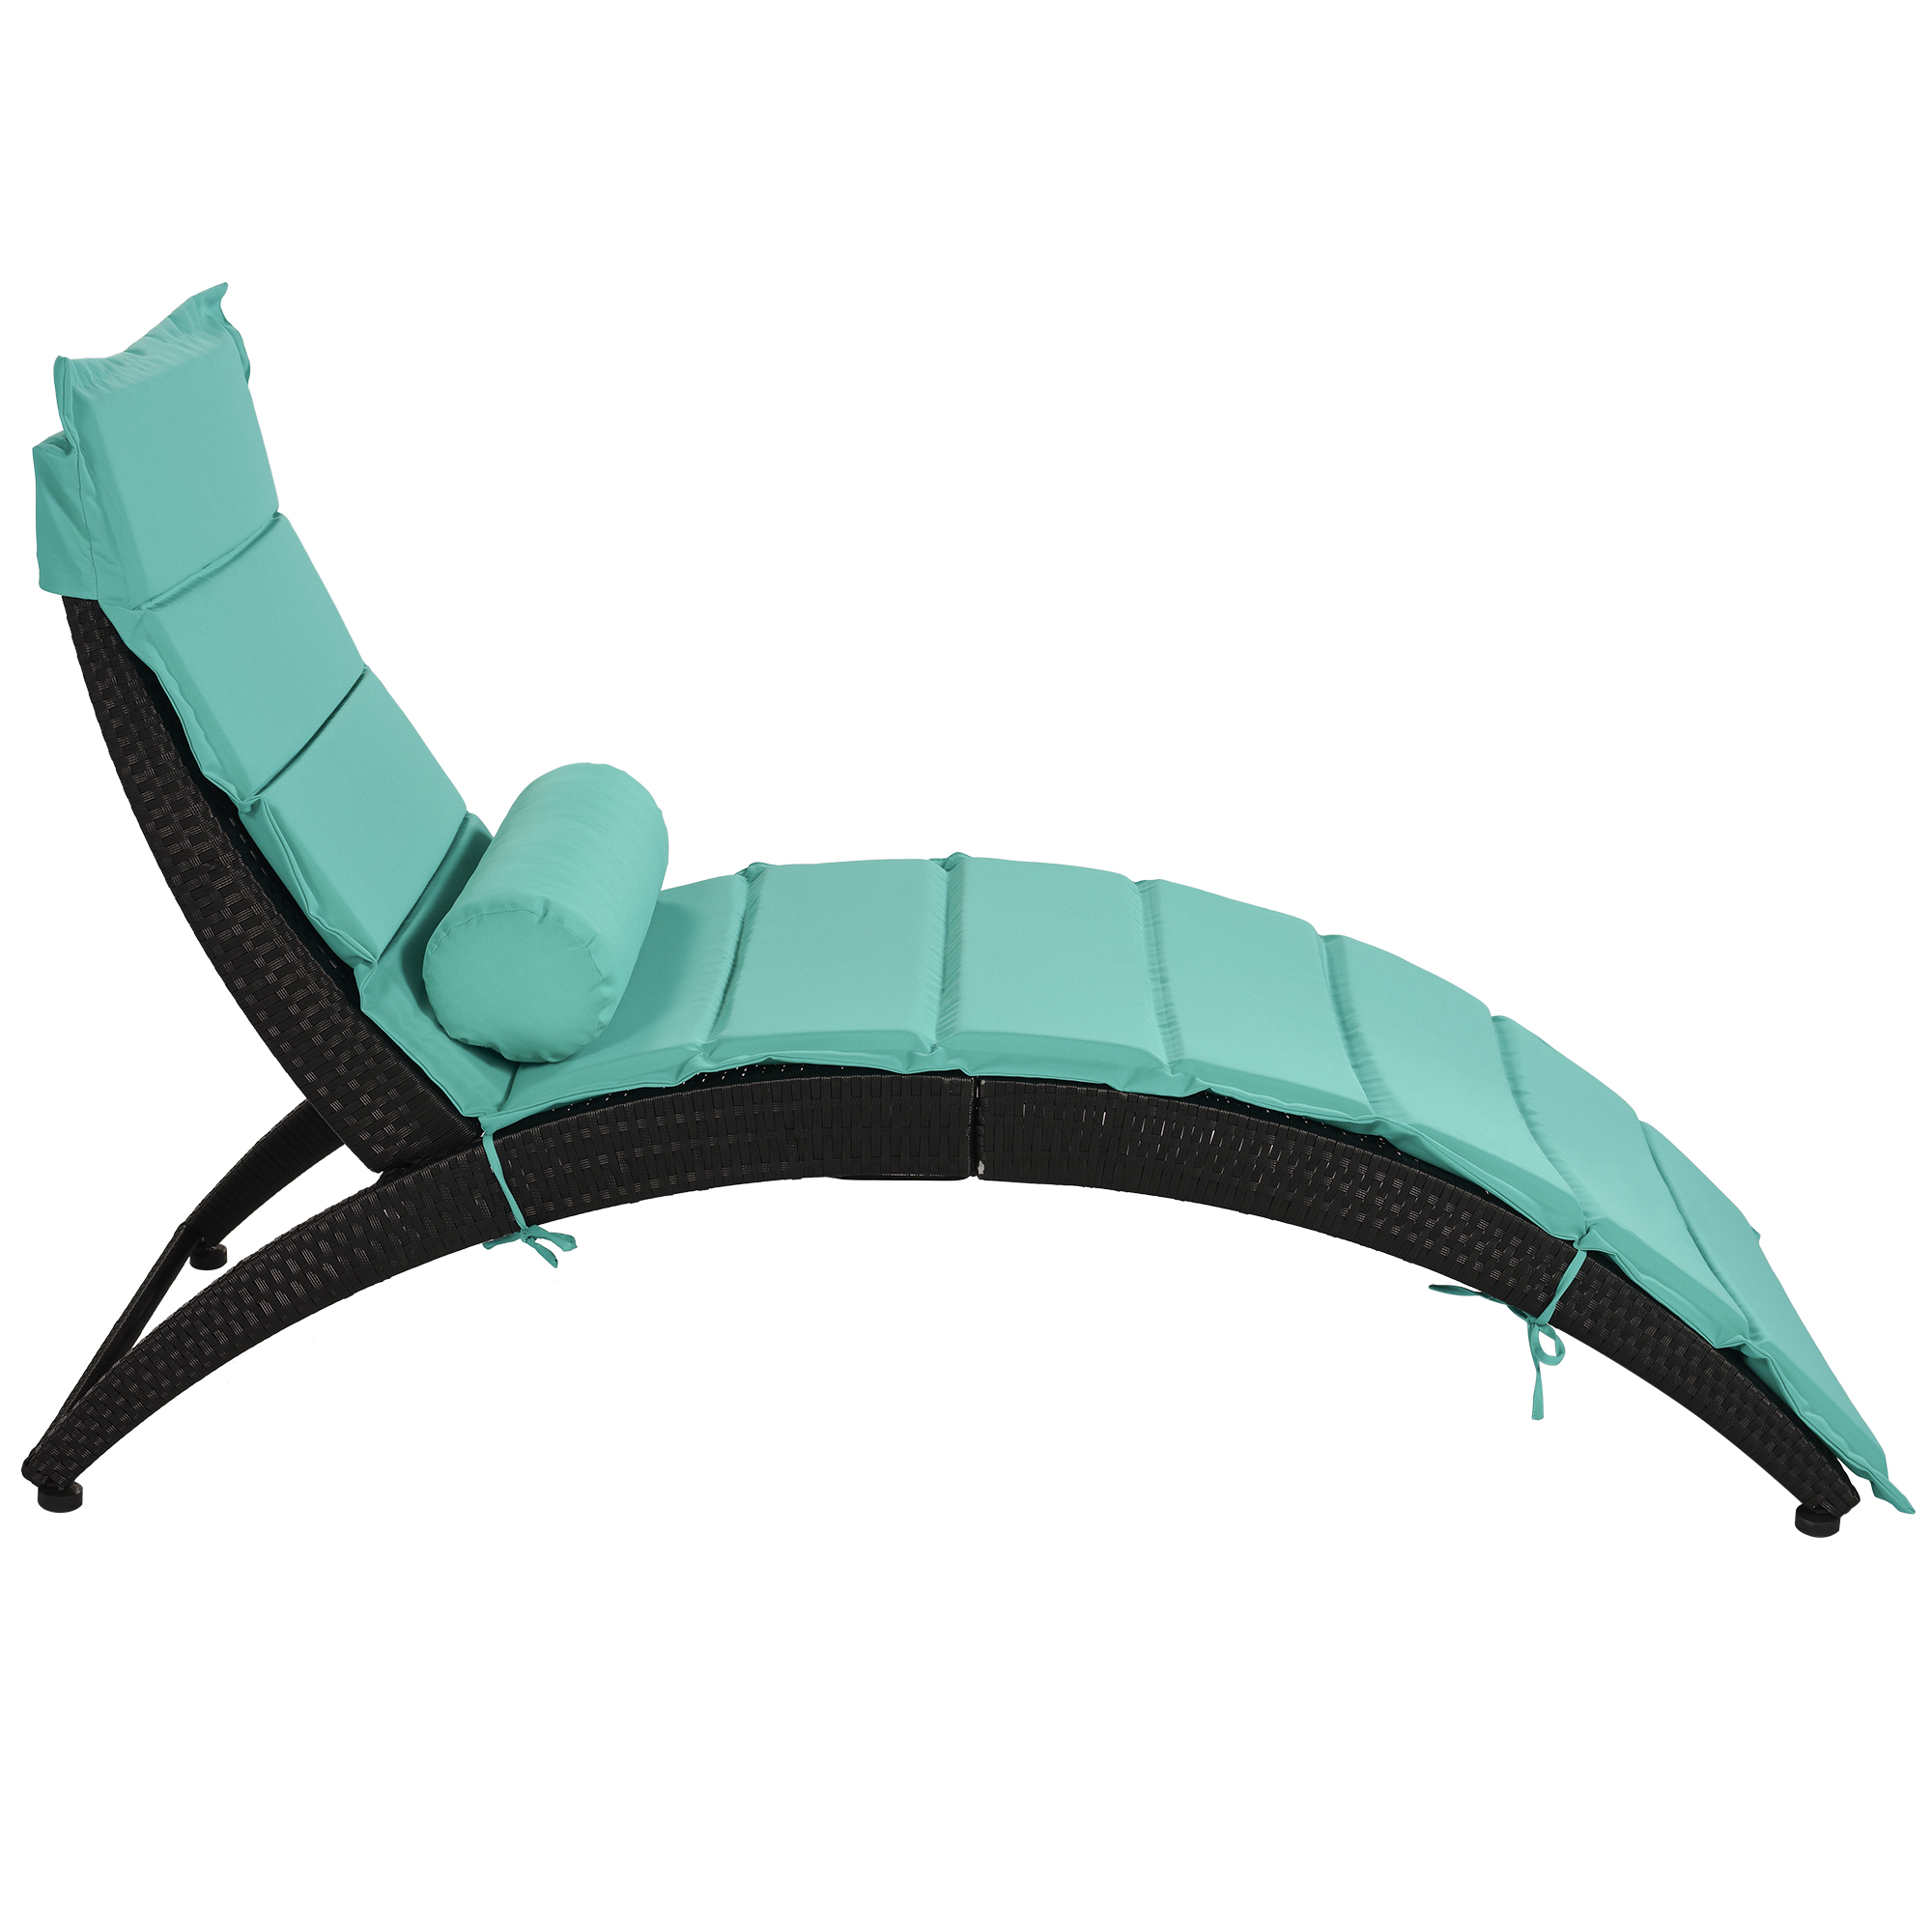 BTMWAY Outdoor Wicker Chaise Lounge, All-Weather Rattan Lounge Chair with Cushion and Head Pillow, Patio Furniture Sun Lounger Foldable Chaise Lounger, Folding Sunbed Tanning Recliner for Beach Pool - image 5 of 11